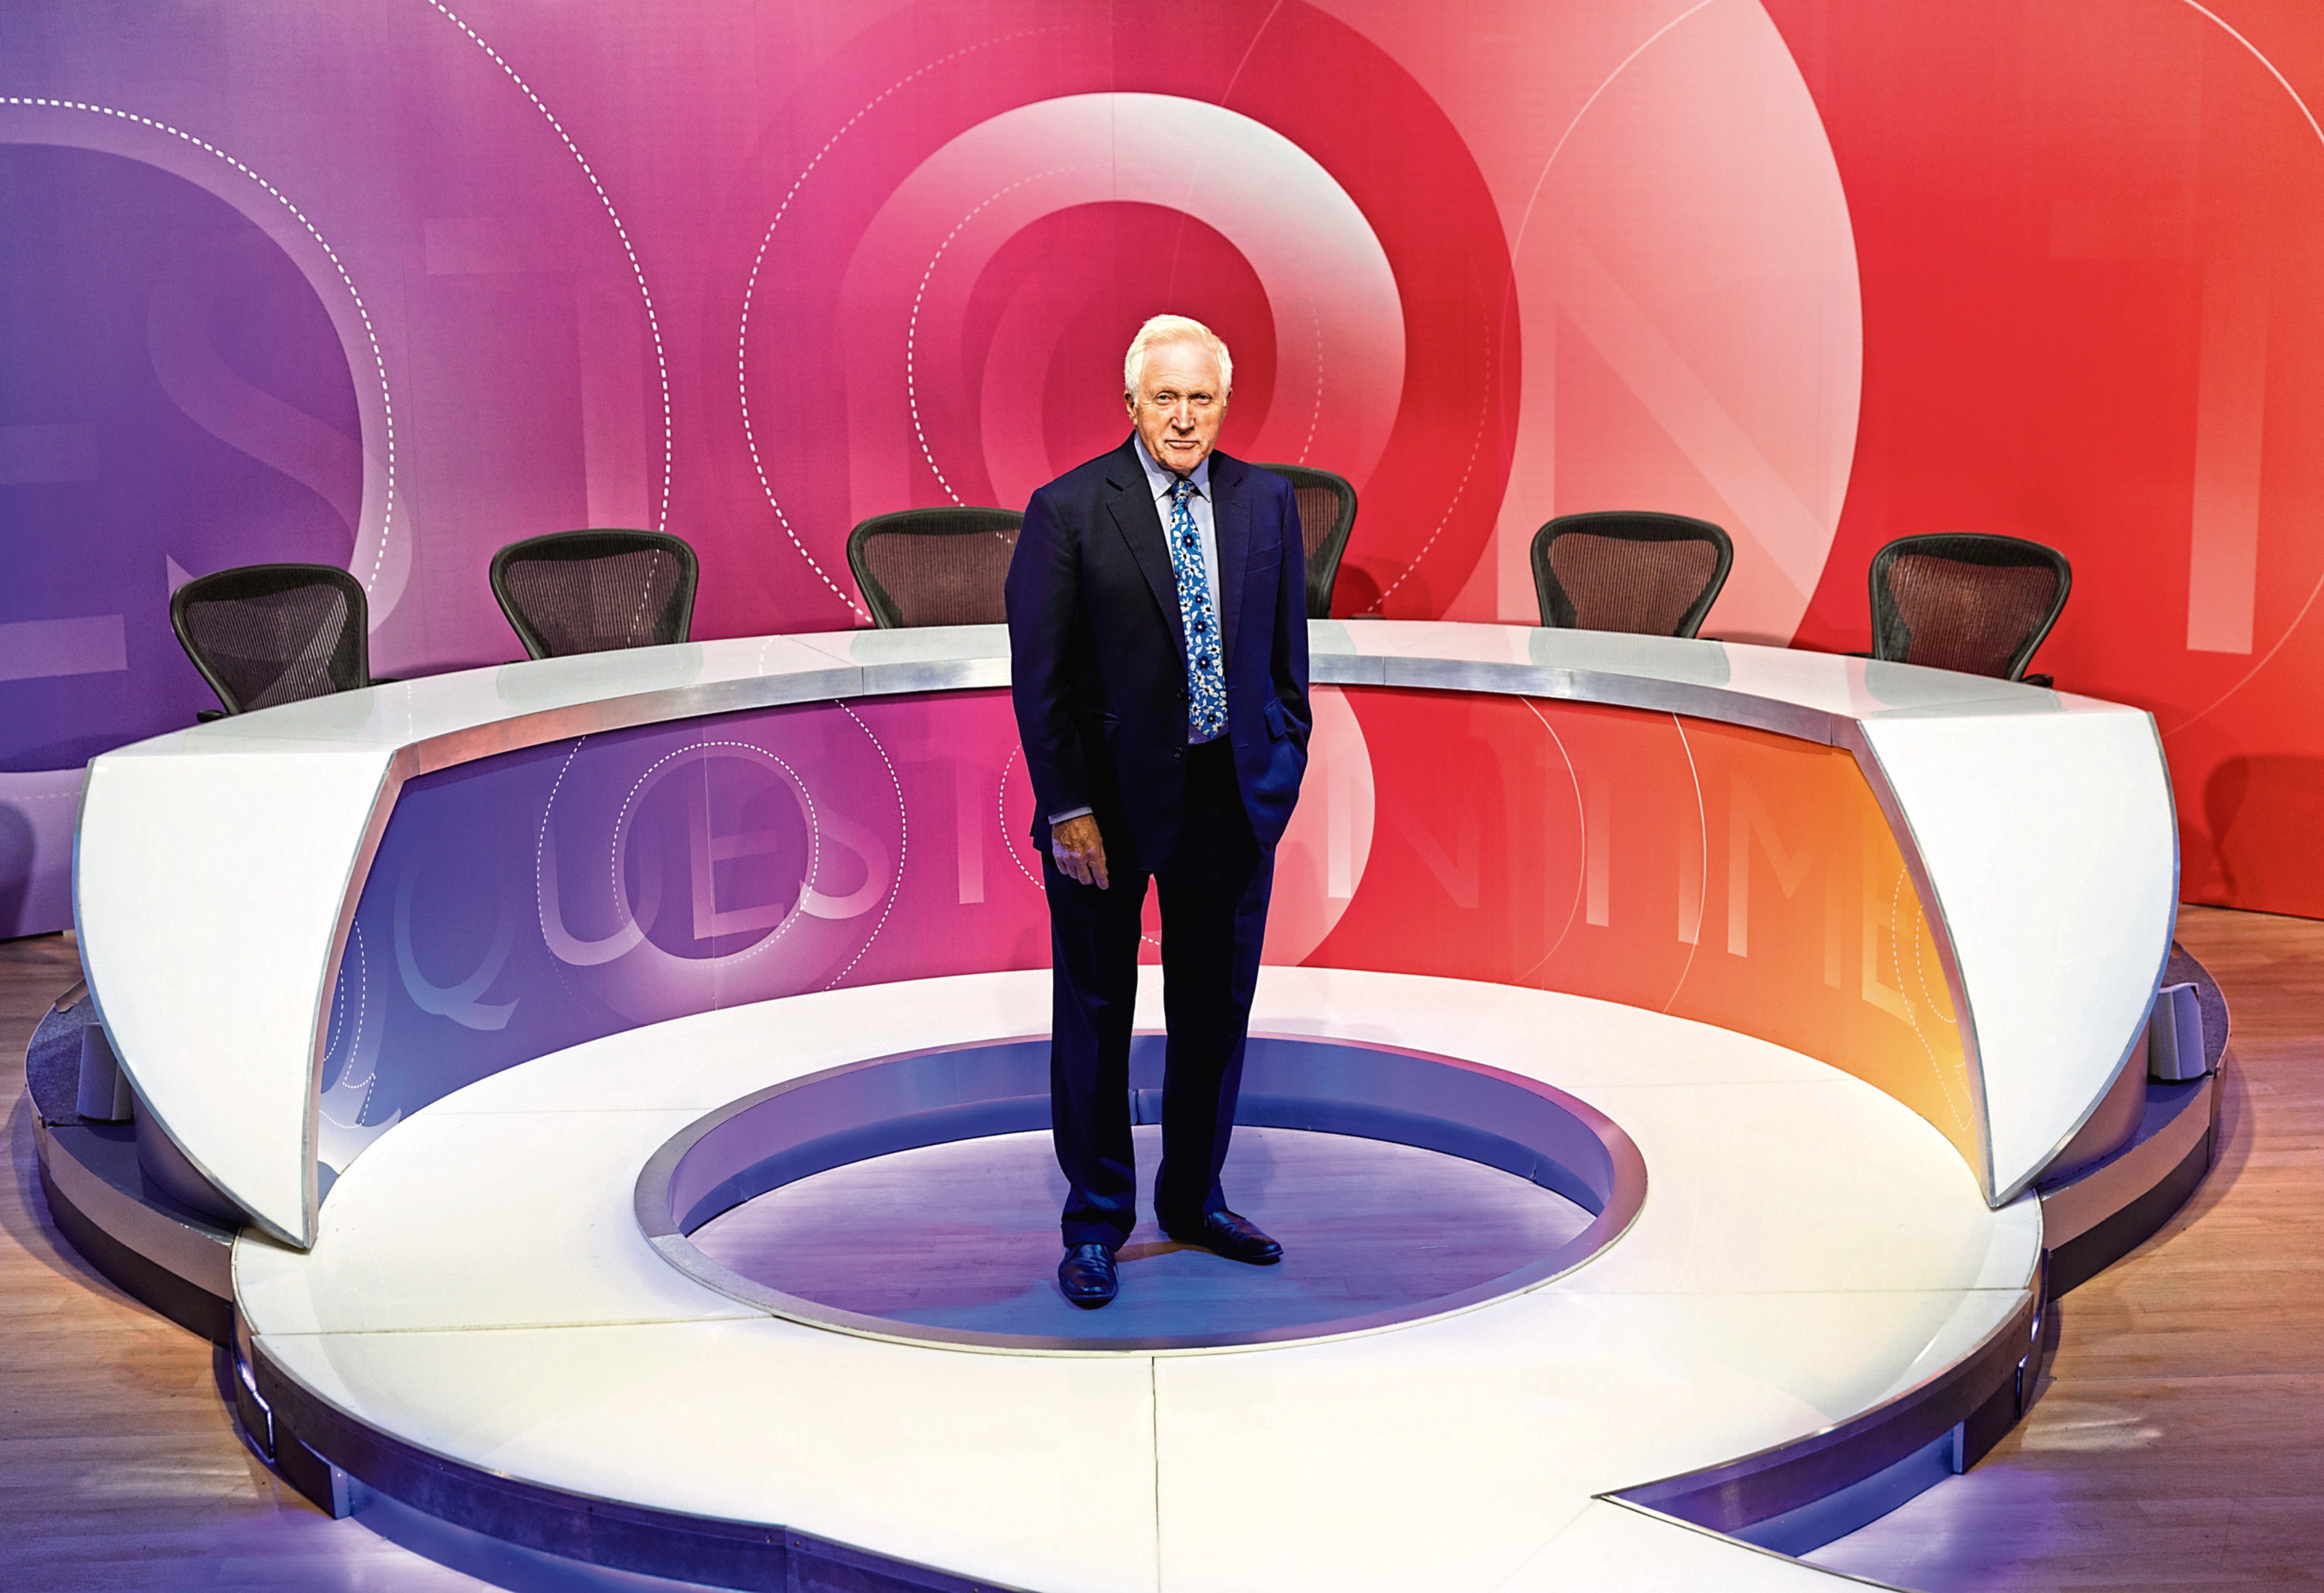 David Dimbleby, host of BBC's Question Time.